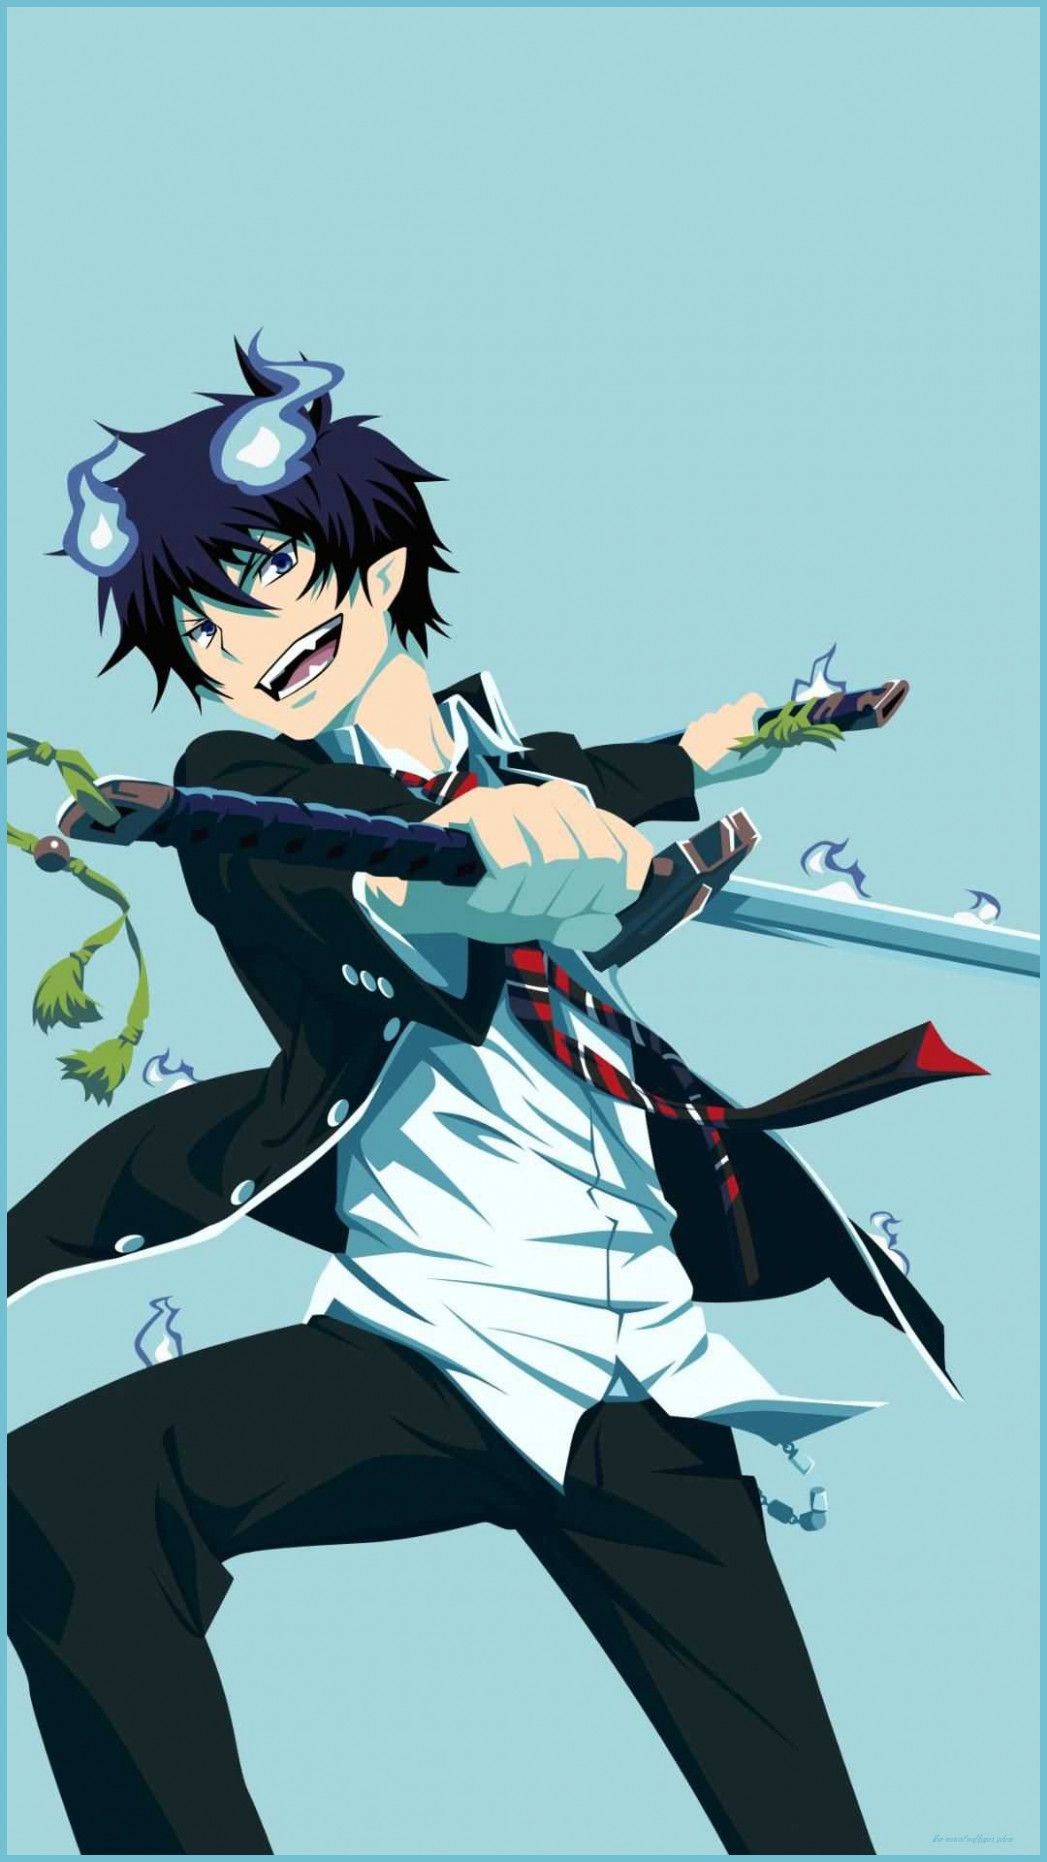 How I Successfuly Organized My Very Own Blue Exorcist Wallpaper iPhone. Blue Exorcist Wallpaper iPhone